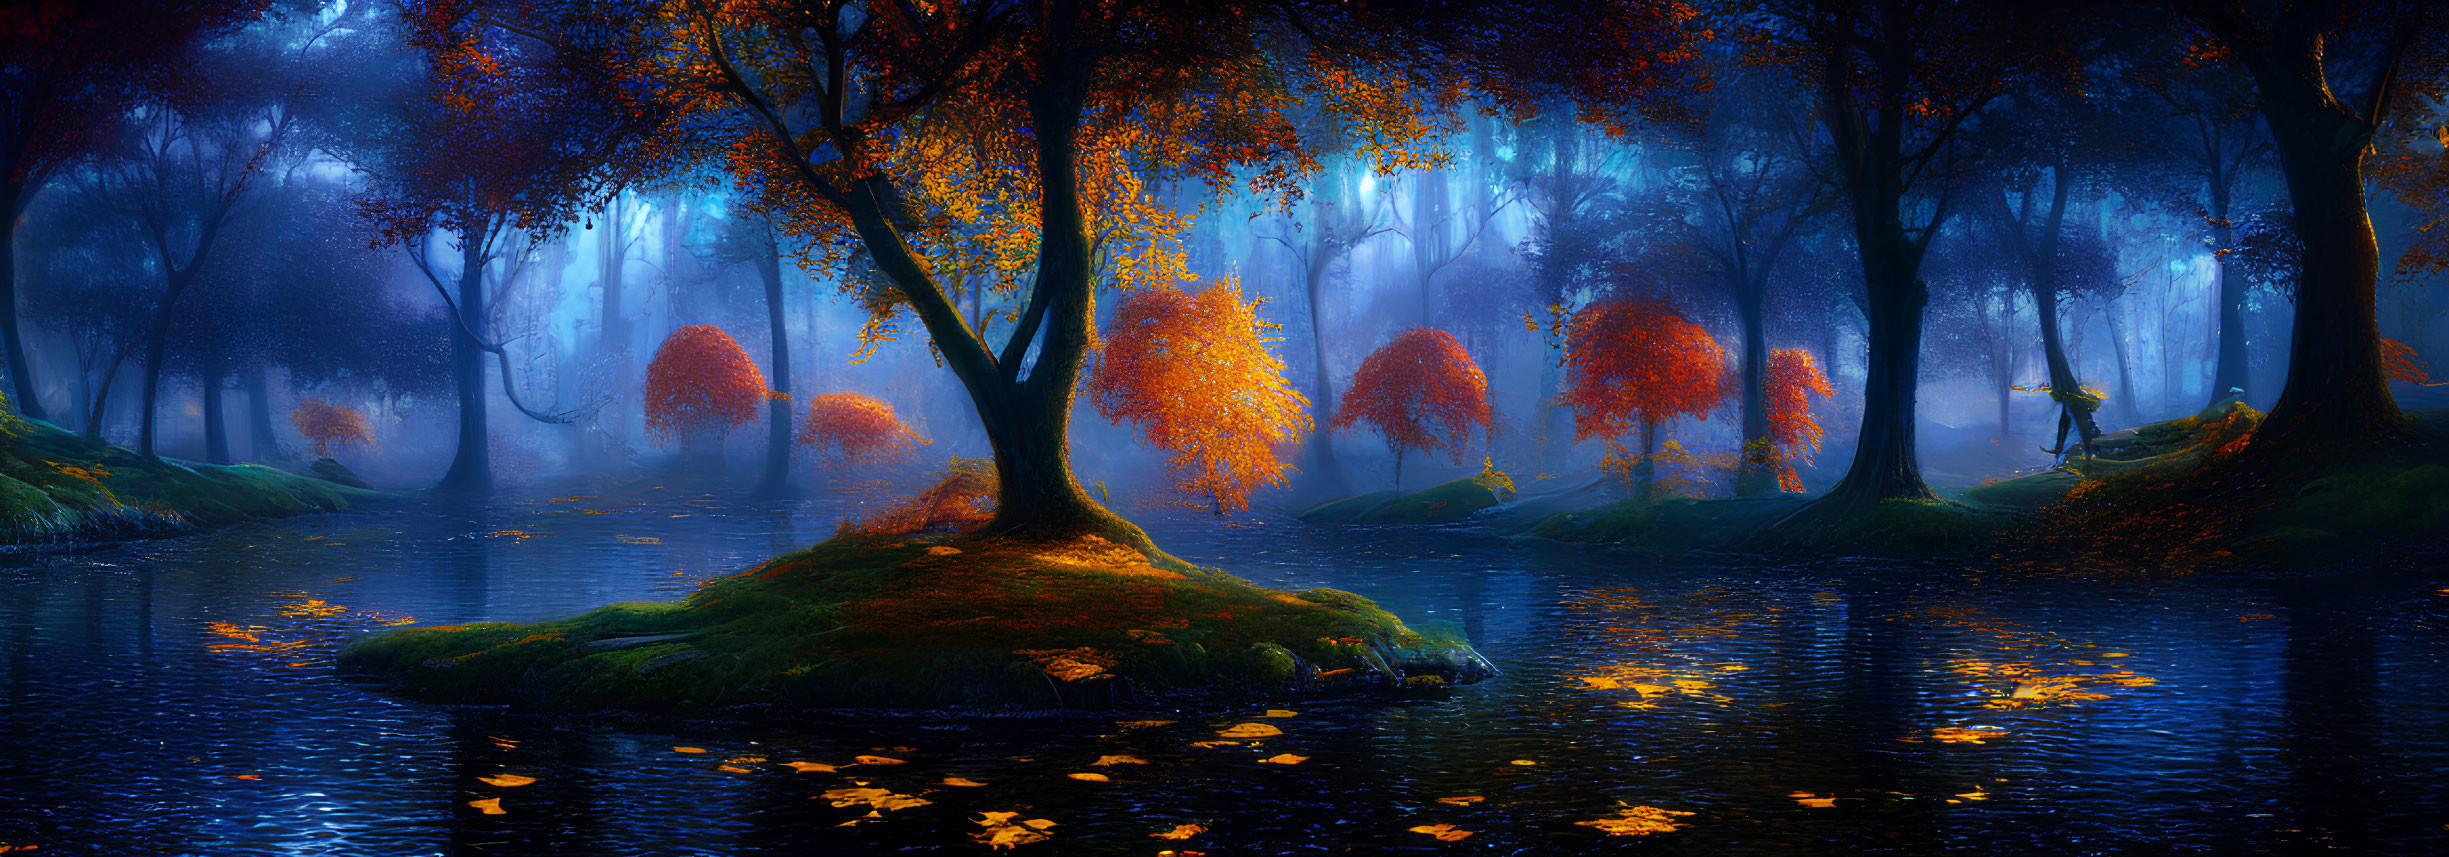 Vibrant Orange Trees in Mystical Autumn Forest on Island by River